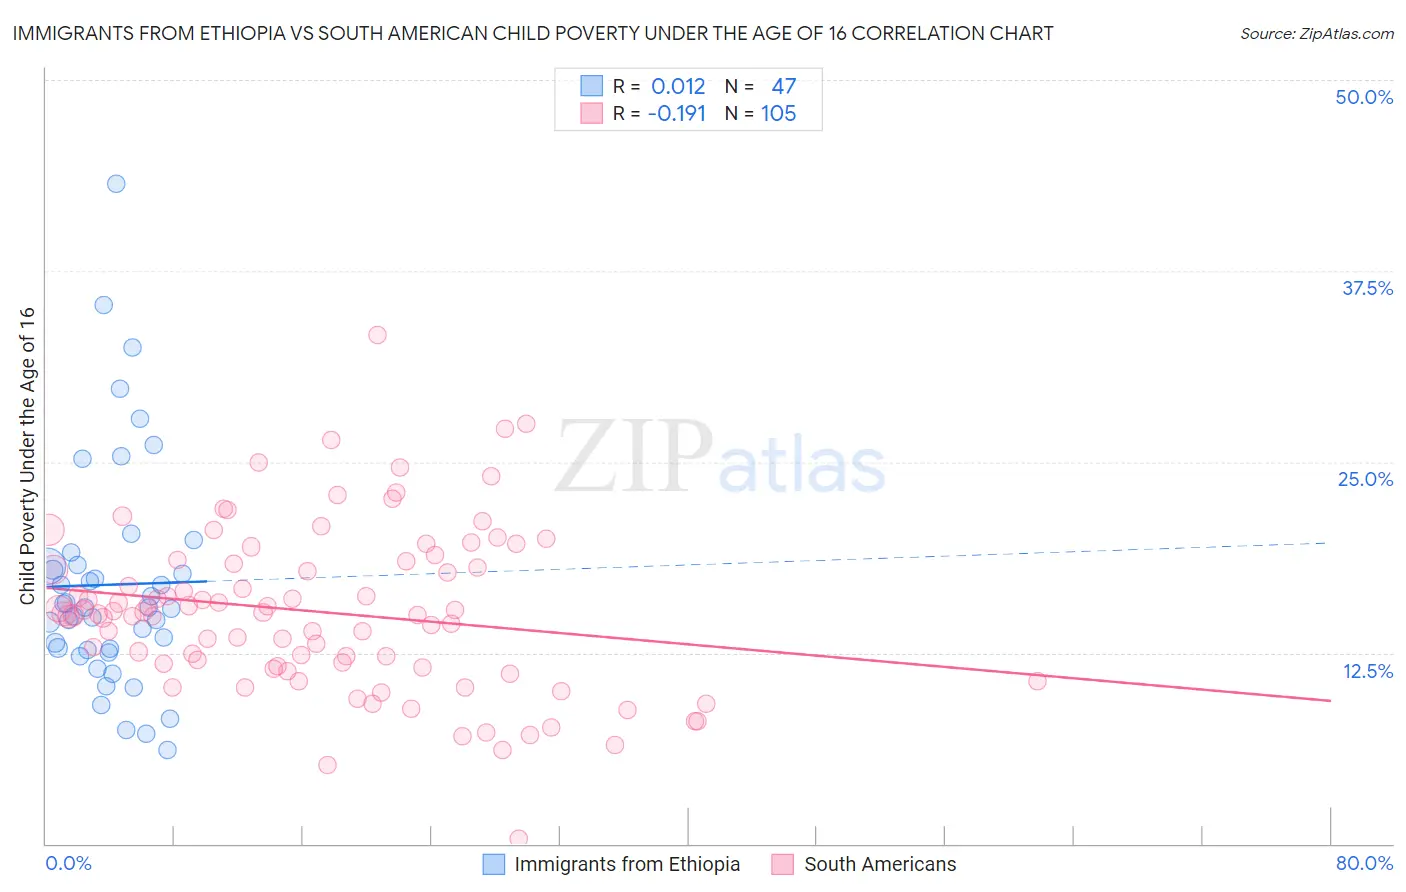 Immigrants from Ethiopia vs South American Child Poverty Under the Age of 16